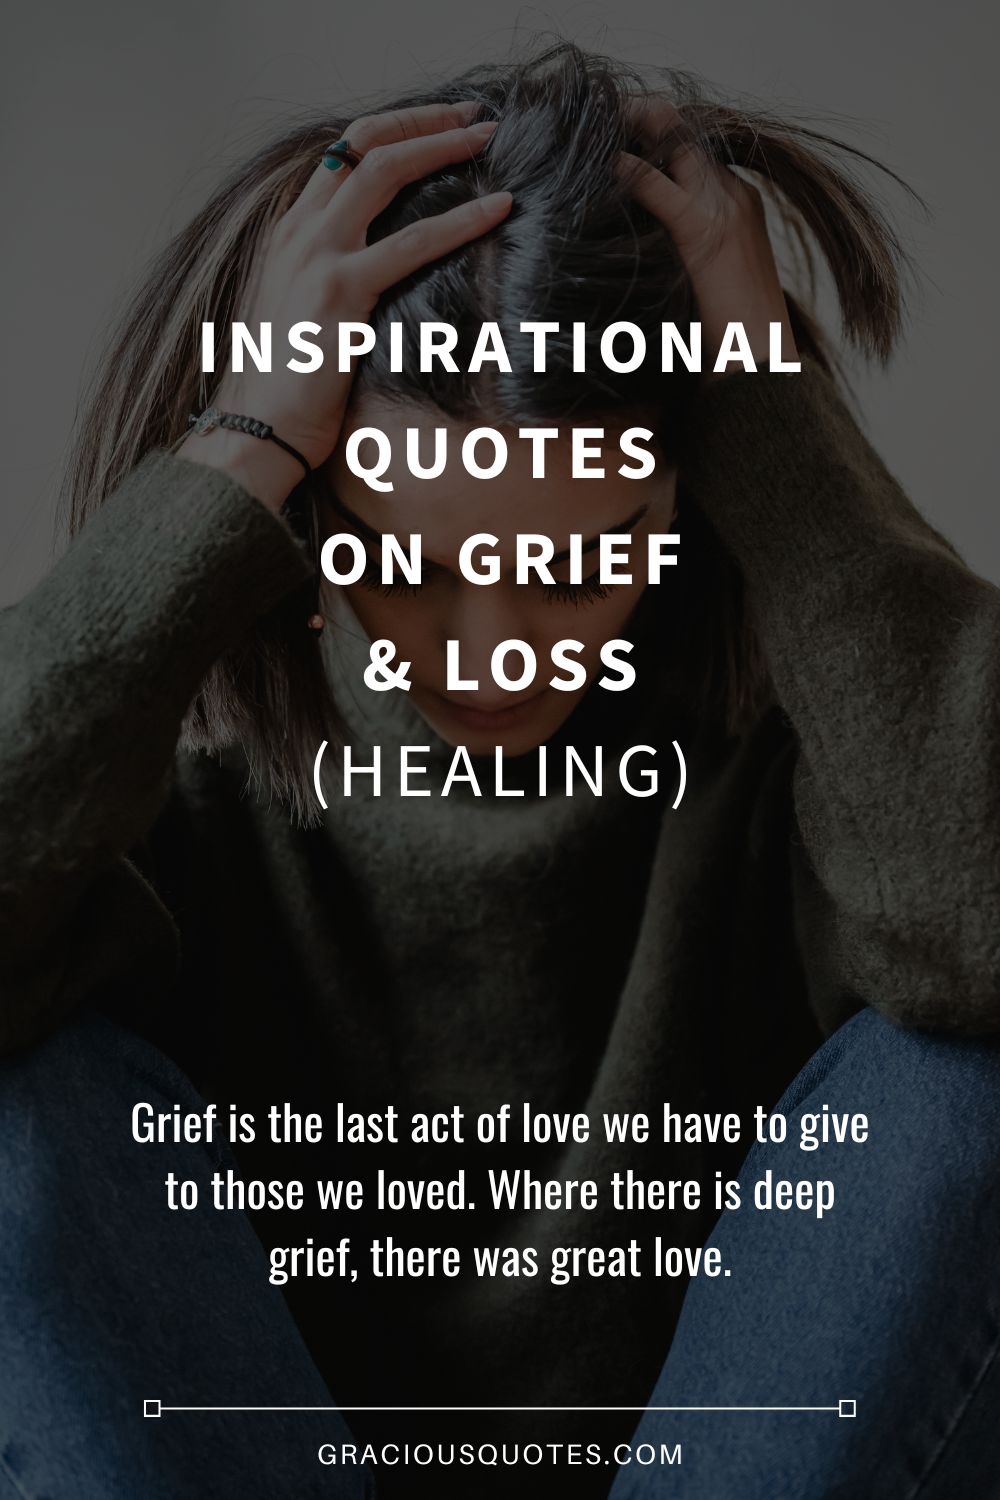 Inspirational Quotes on Grief & Loss (HEALING) - Gracious Quotes